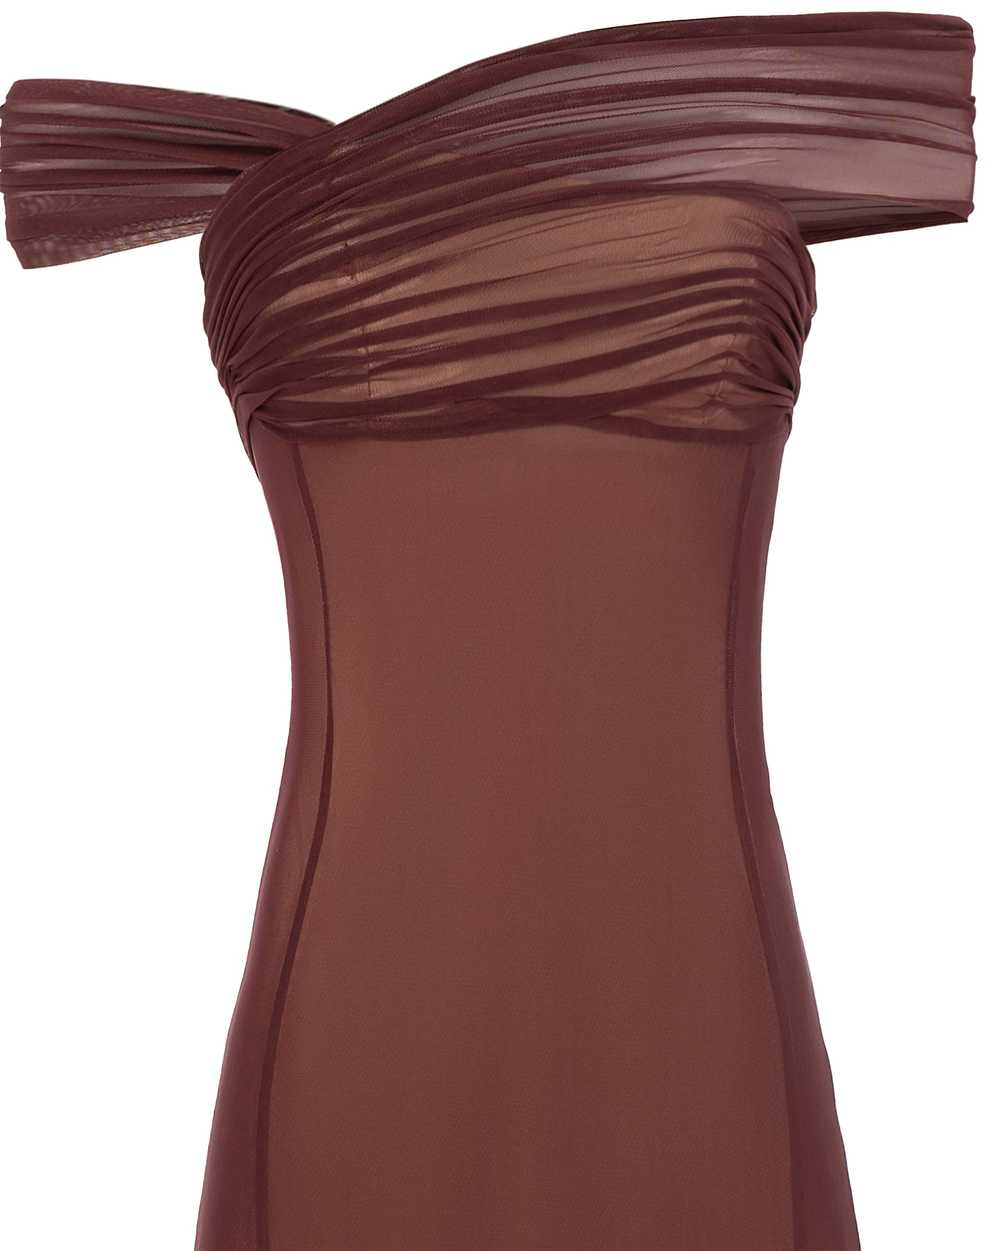 Milla Second-skin maxi dress in chocolate color - image 5